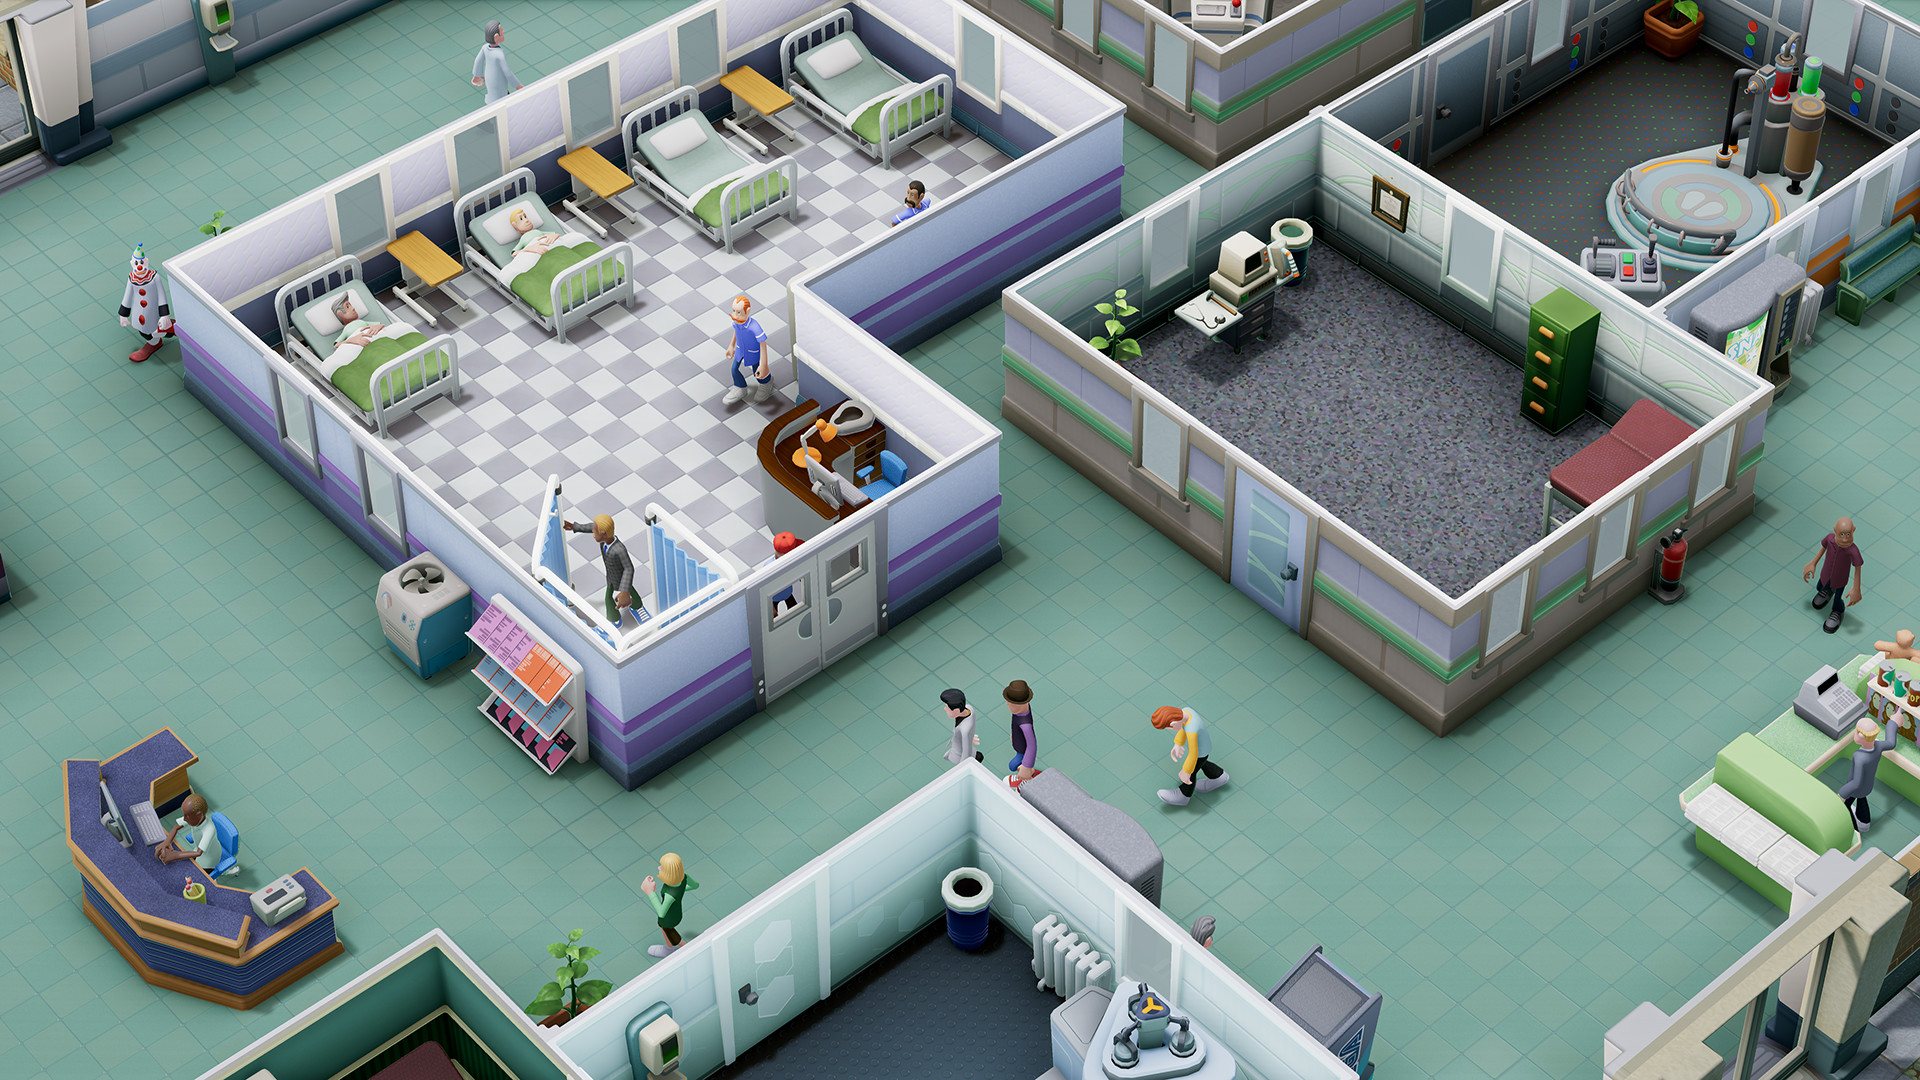 Two Point Hospital: Healthy Collection Vol. 3 Bundle RoW Steam CD Key